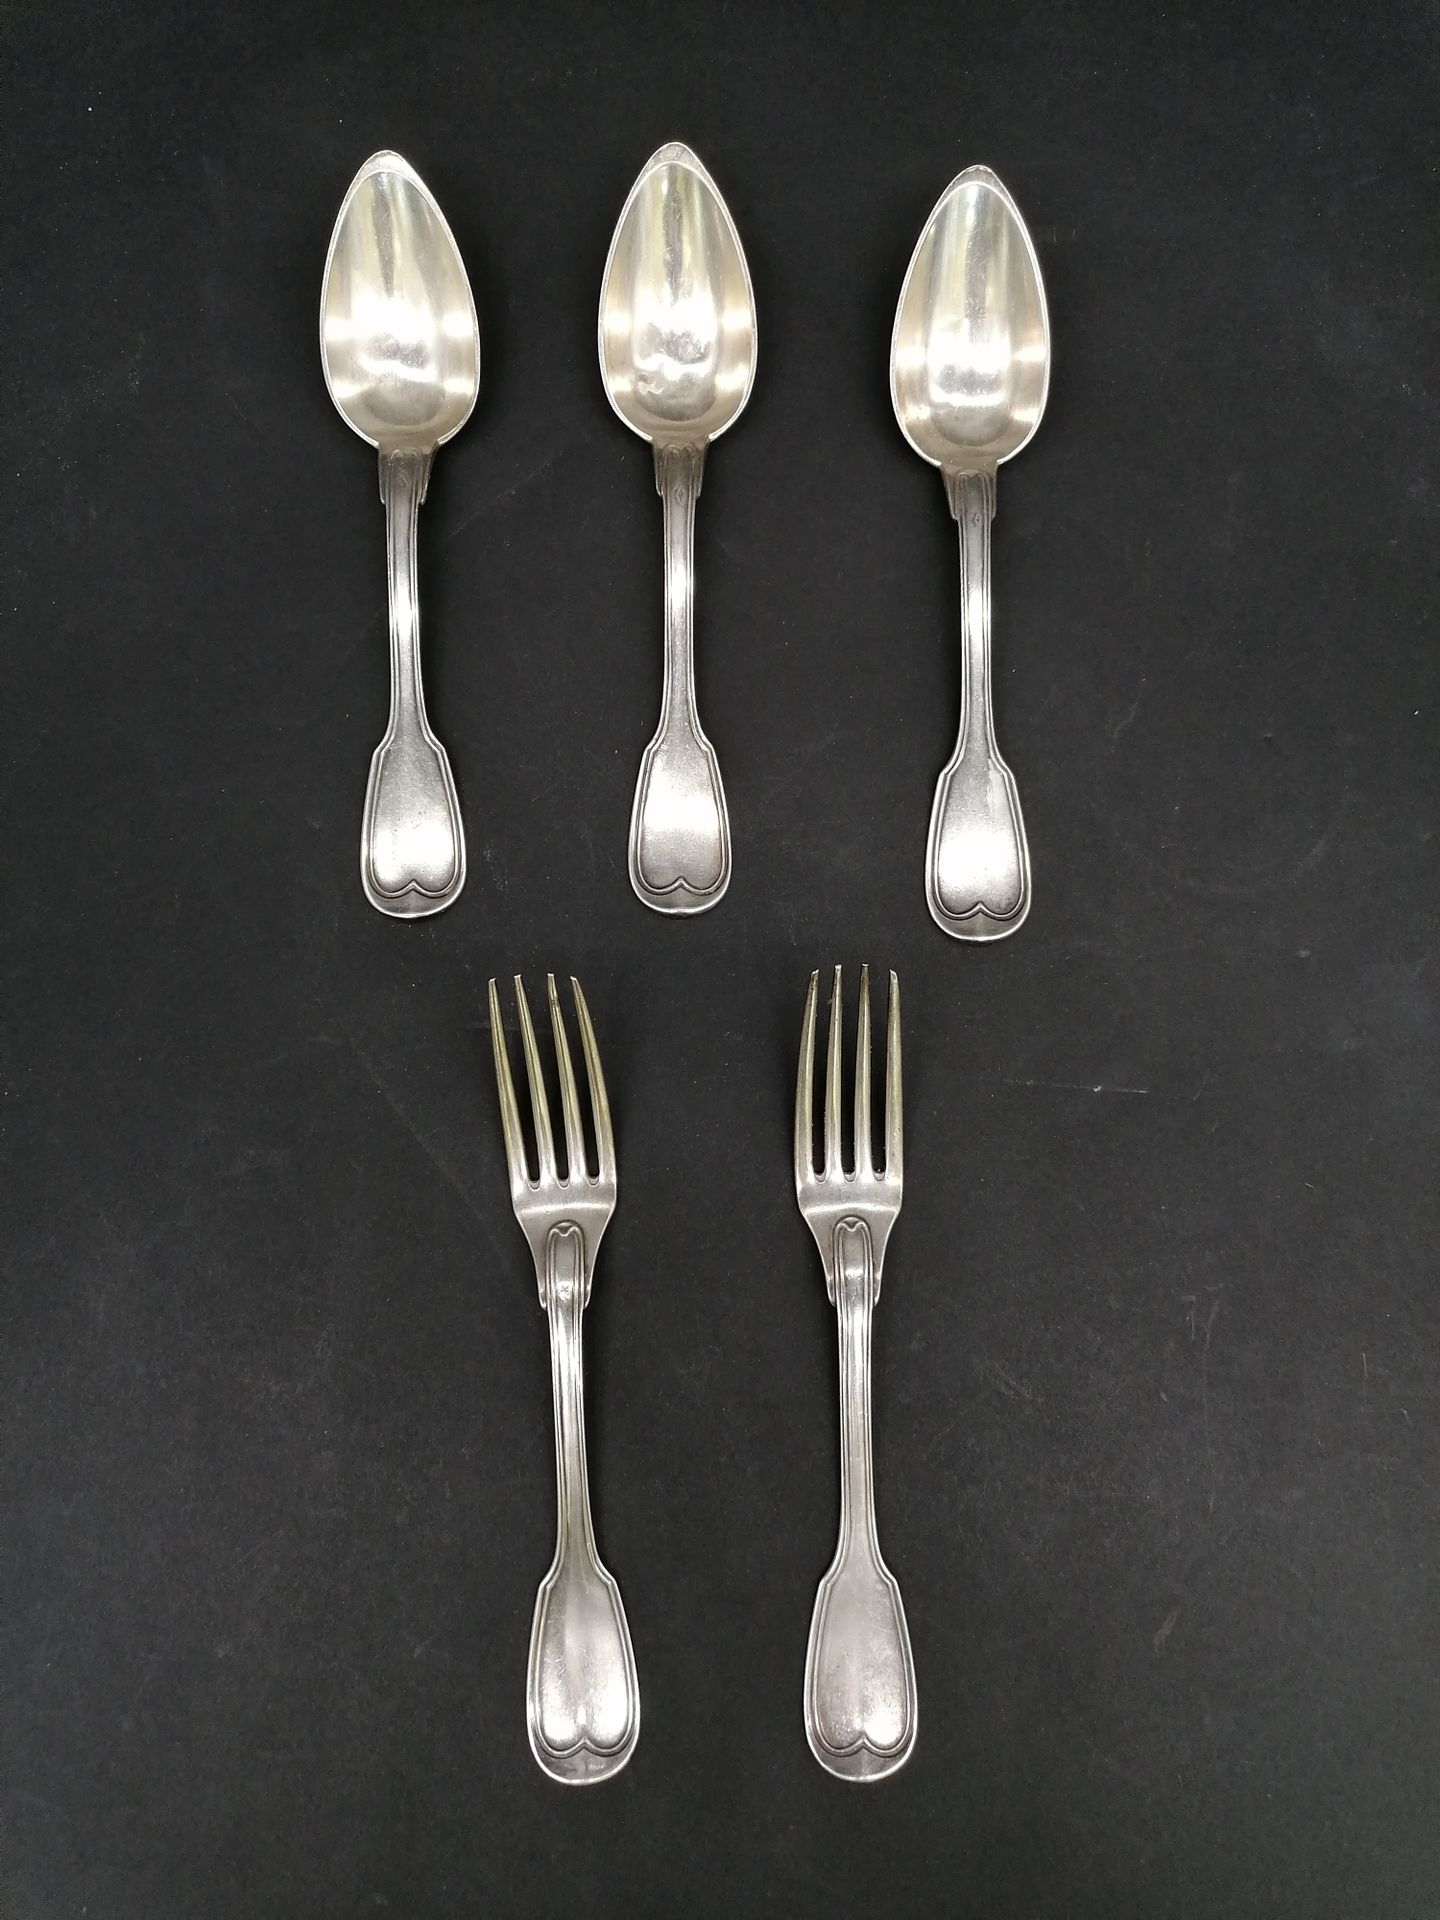 Null Set of SILVER COUVERTS

Three soup spoons and two table forks

Model with n&hellip;